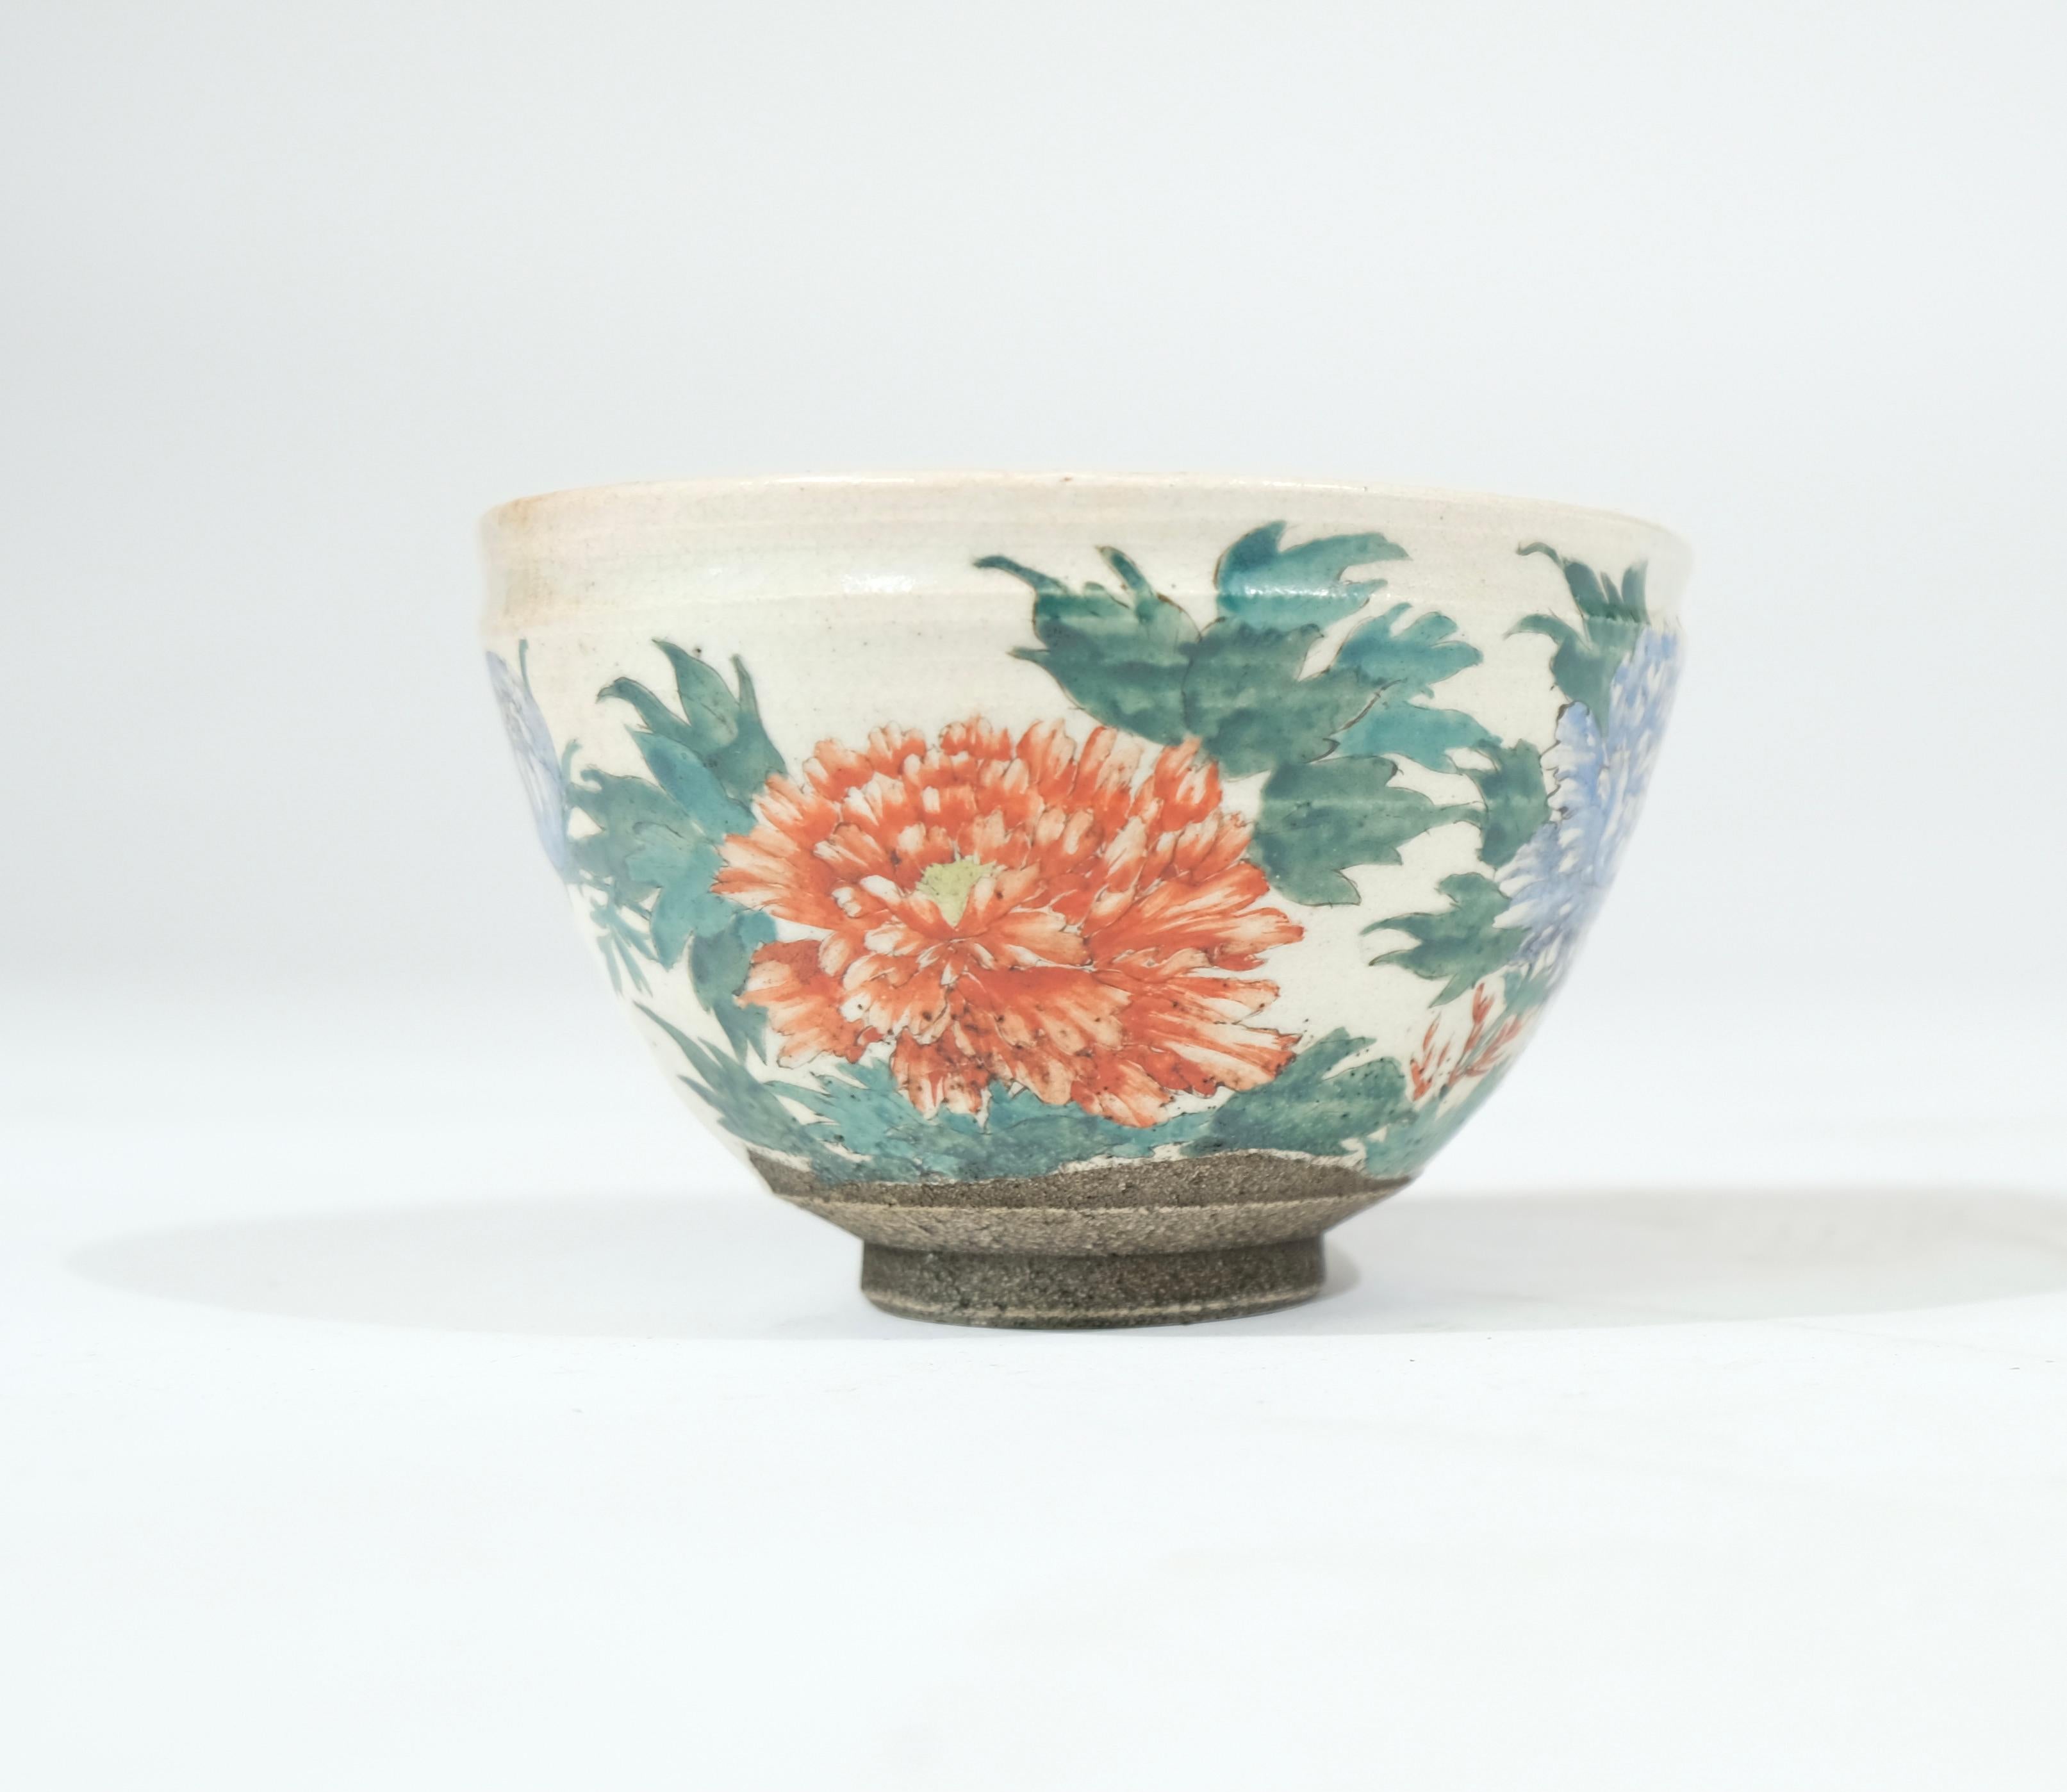 19th Century Japanese Glazed Tea Bowl with Floral Decoration. A so called Chawan. For Sale